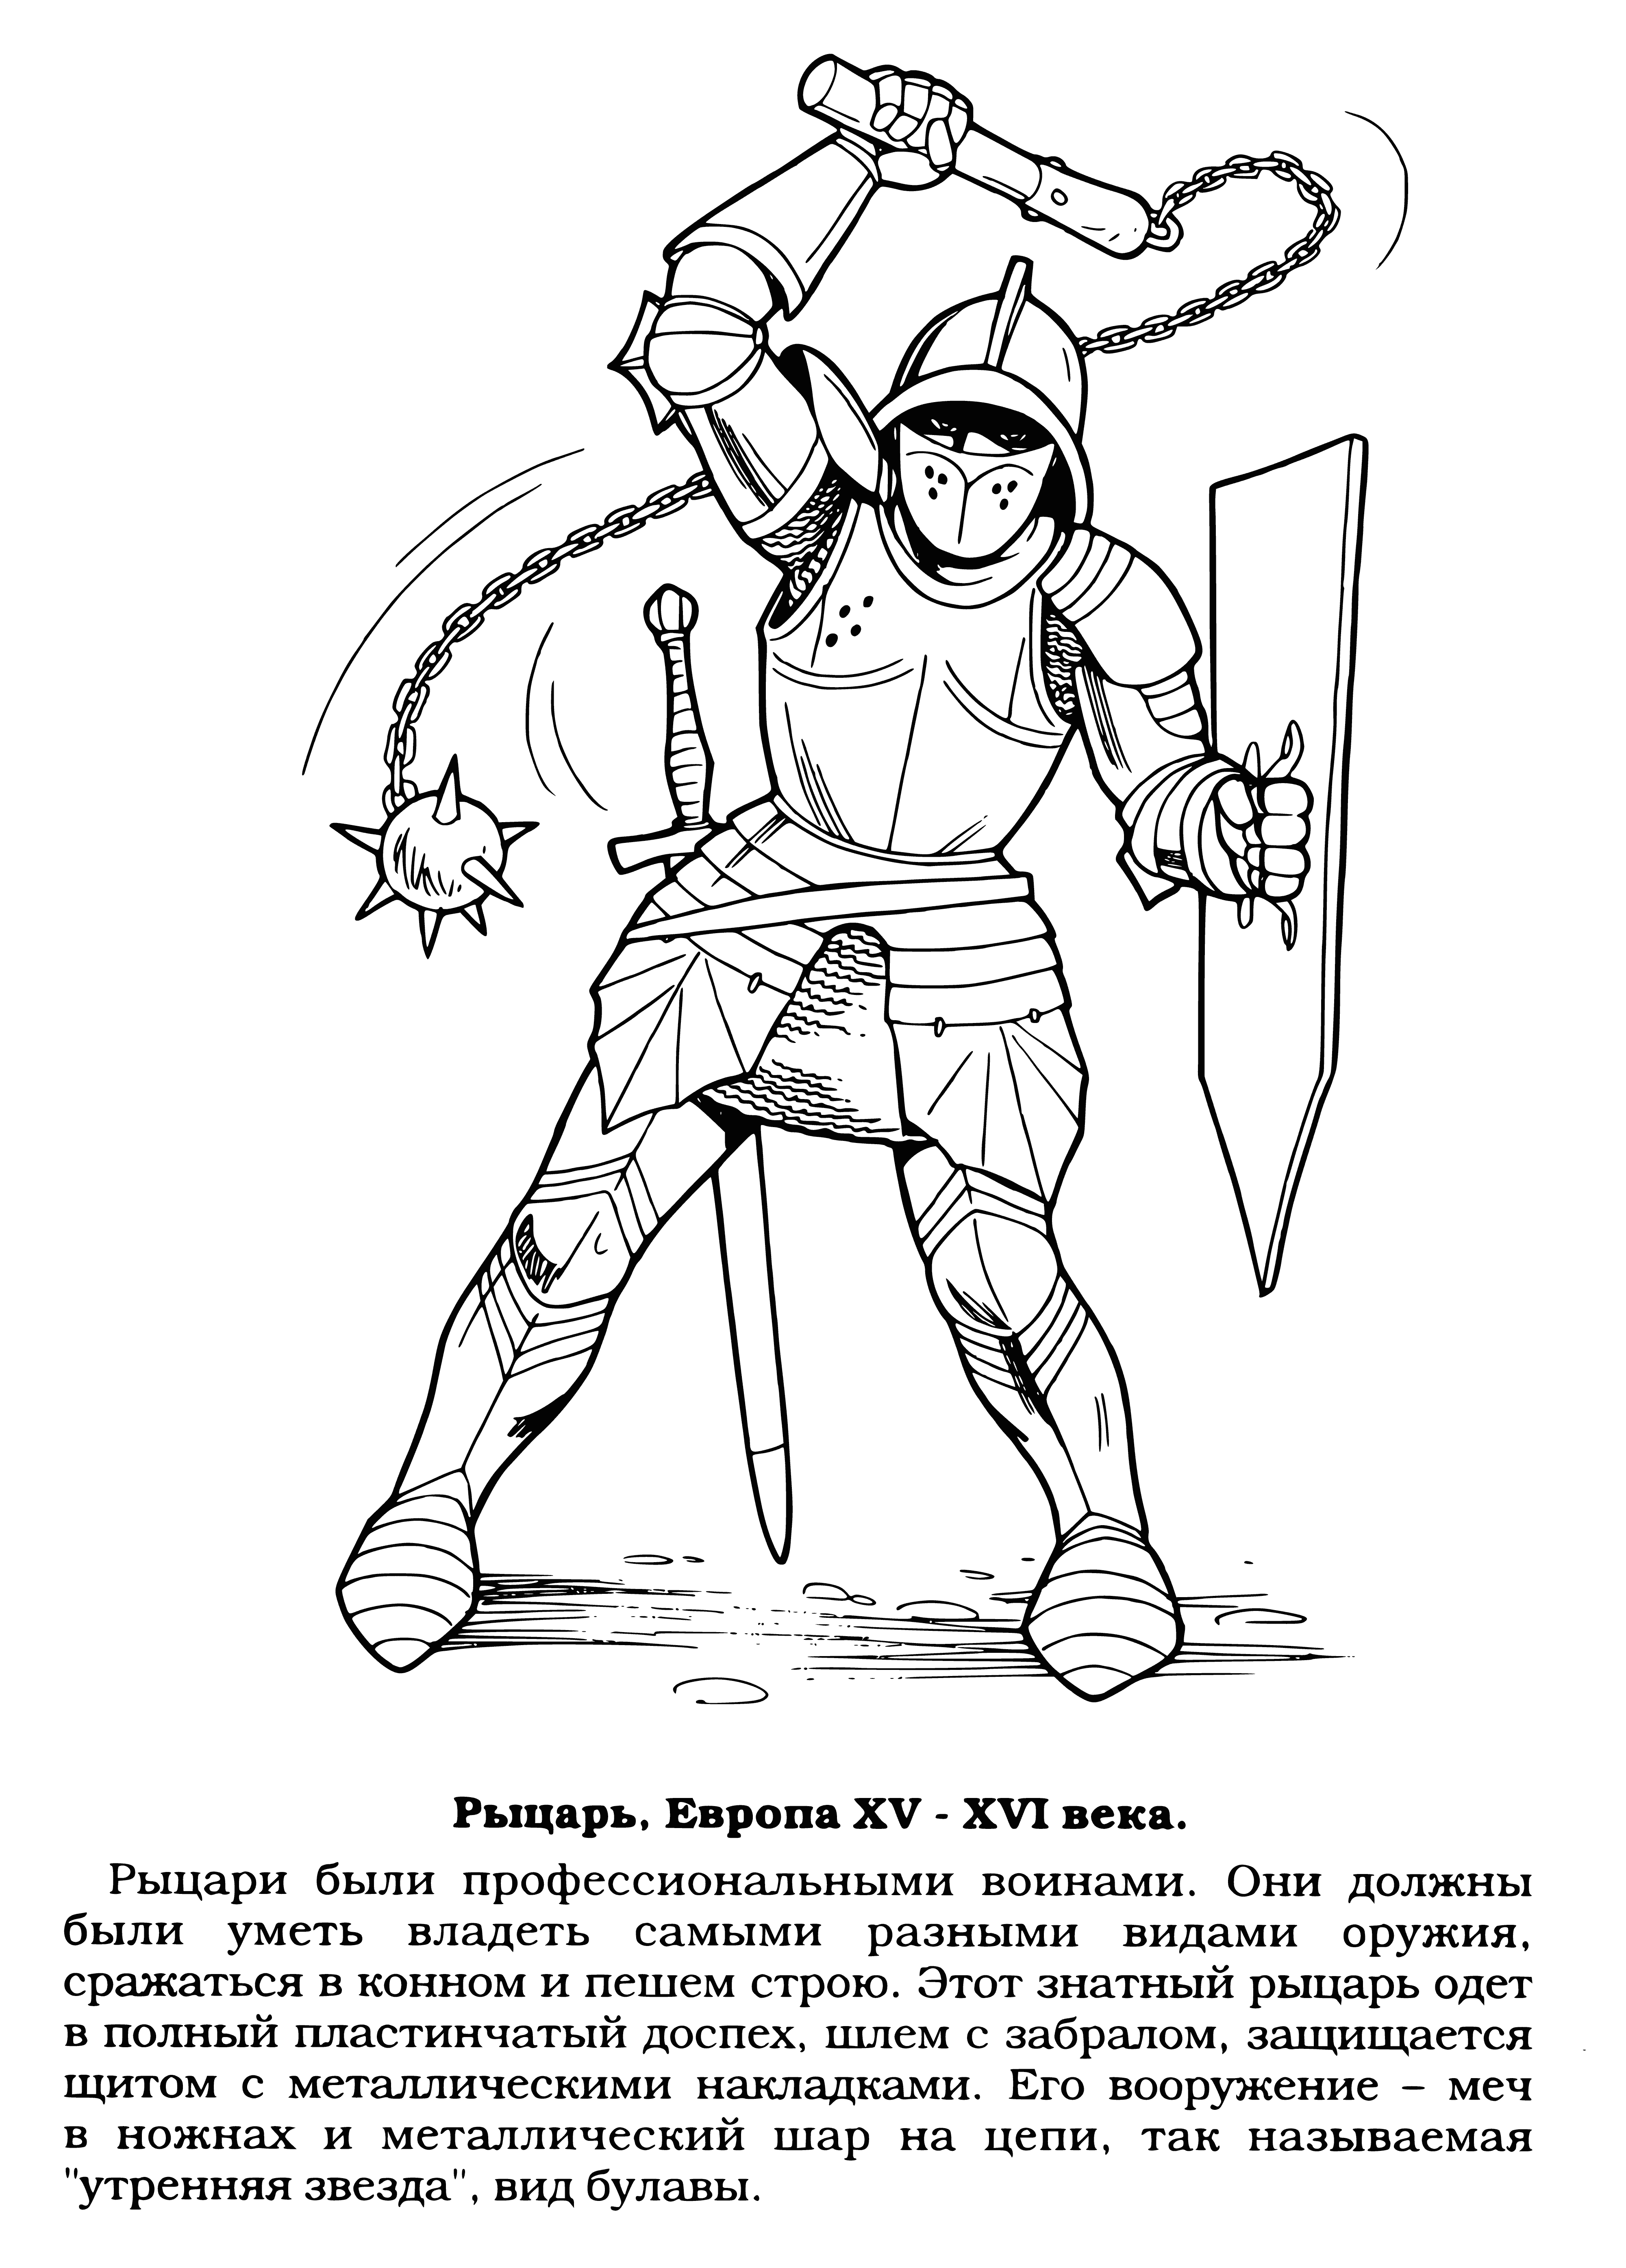 coloring page: Knight in shining armor w/ mace looks strong & capable. Shield & helment show armor well-maintained.